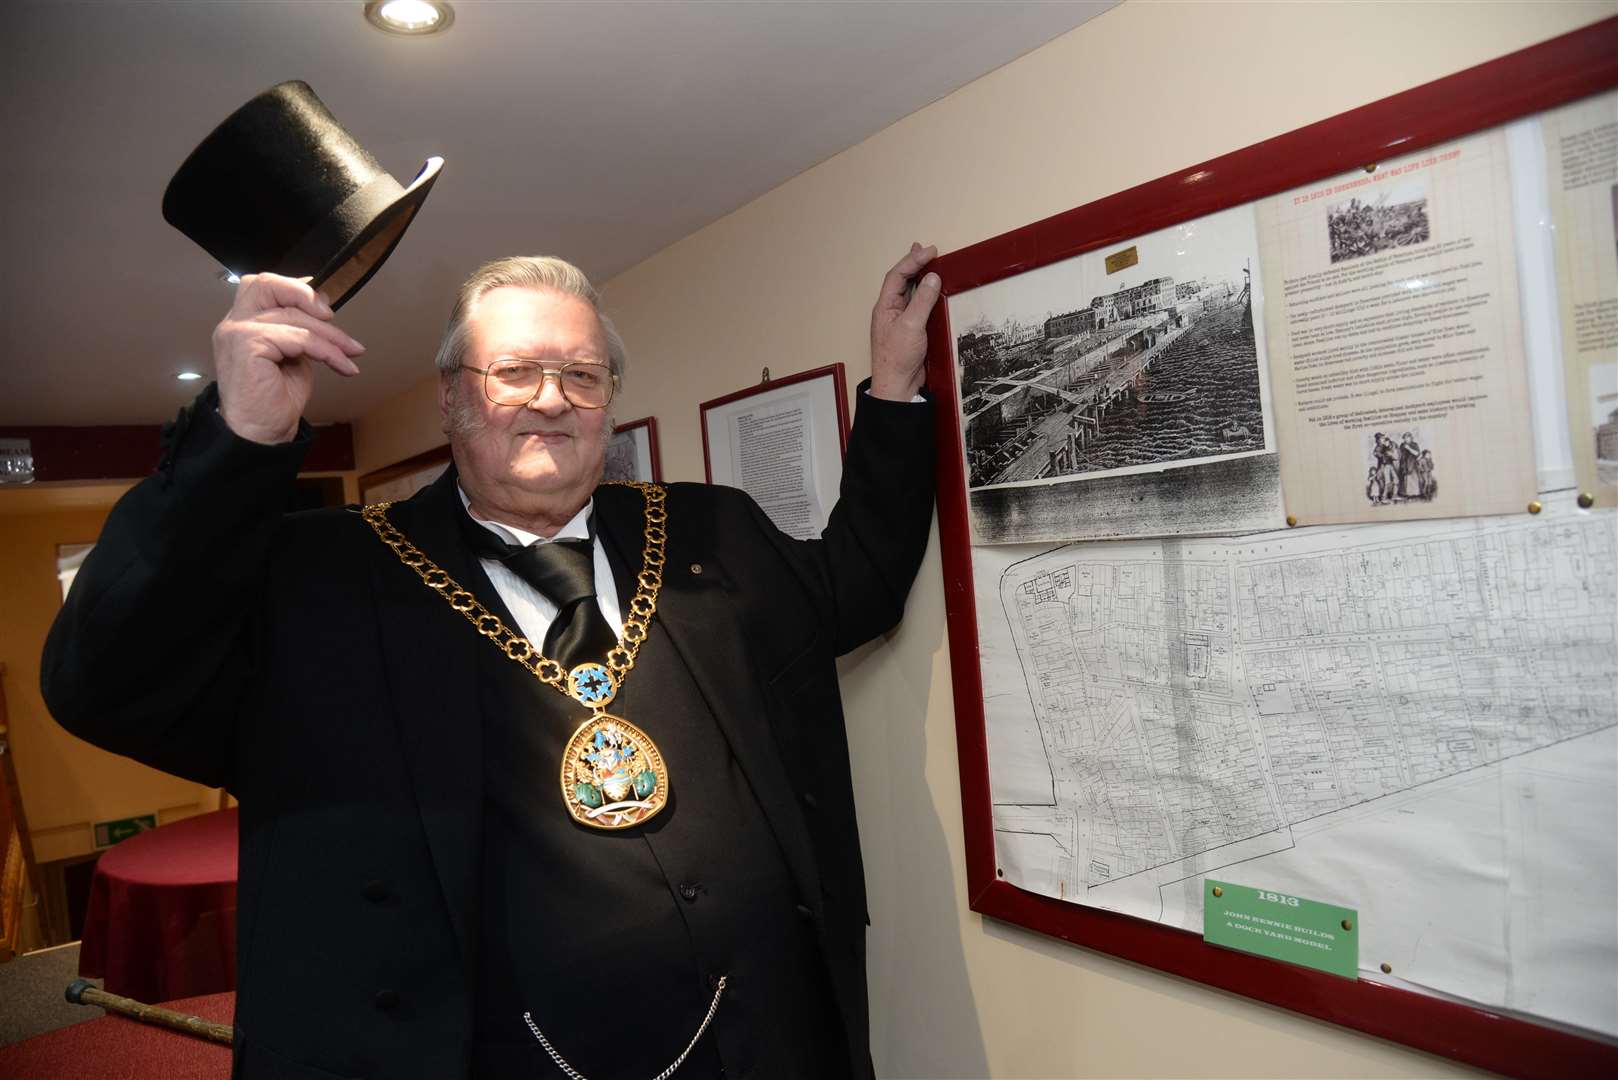 Mayor of Swale Cllr Ken Ingleton at the launch of the Charles Dickens Exhibition at the Criterion Theatre in Blue Town. Picture: Chris Davey